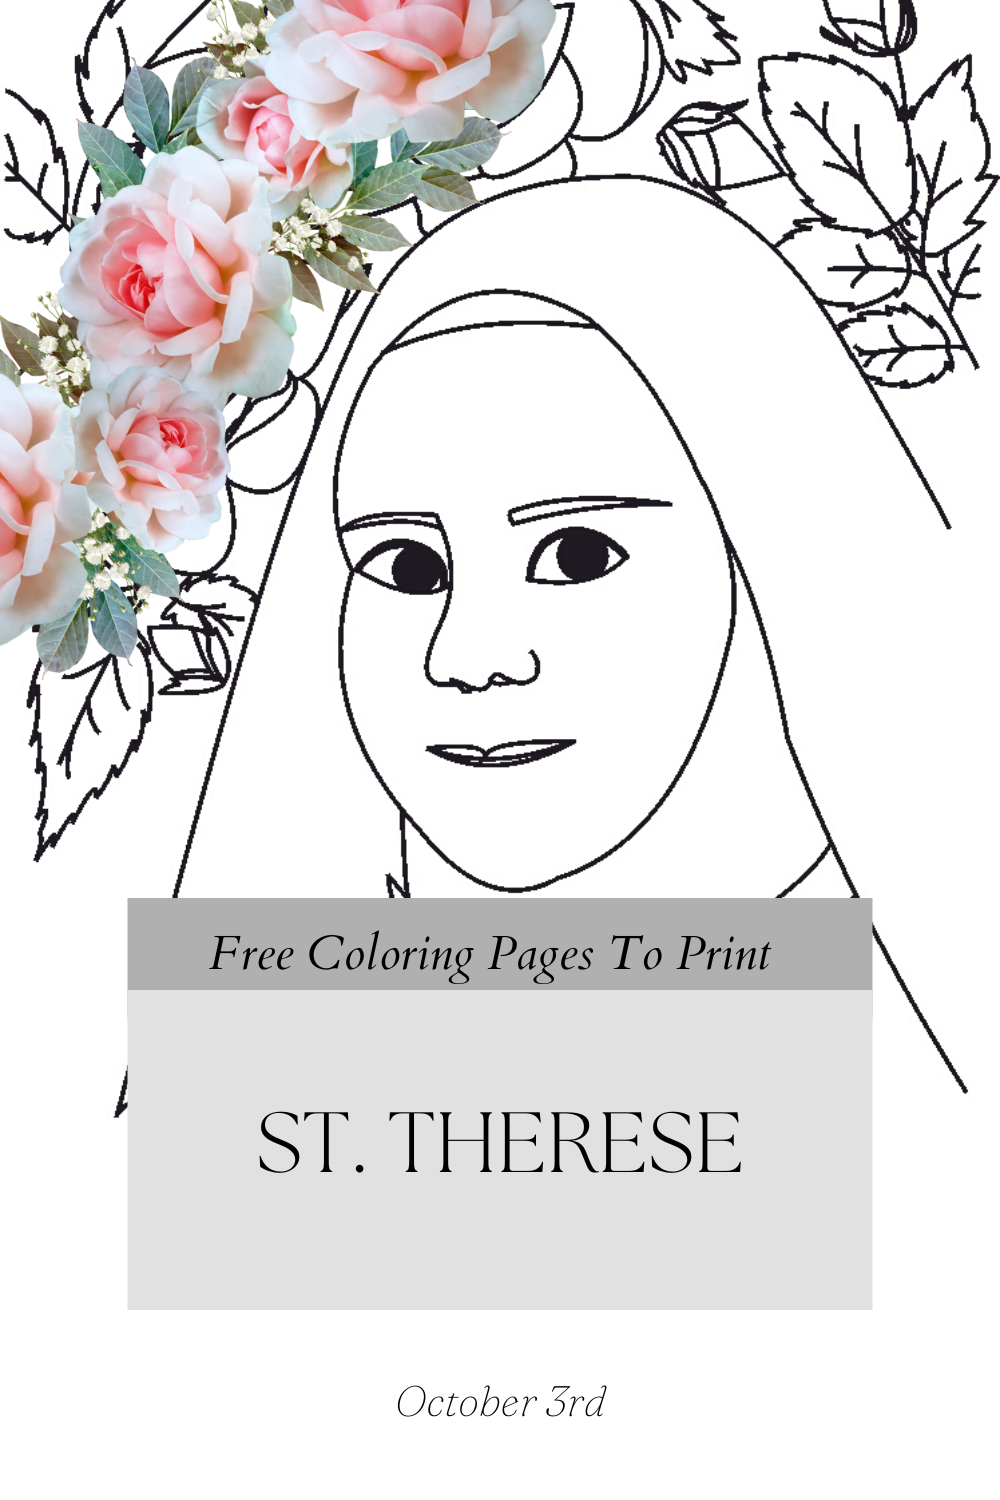 st Therese coloring page